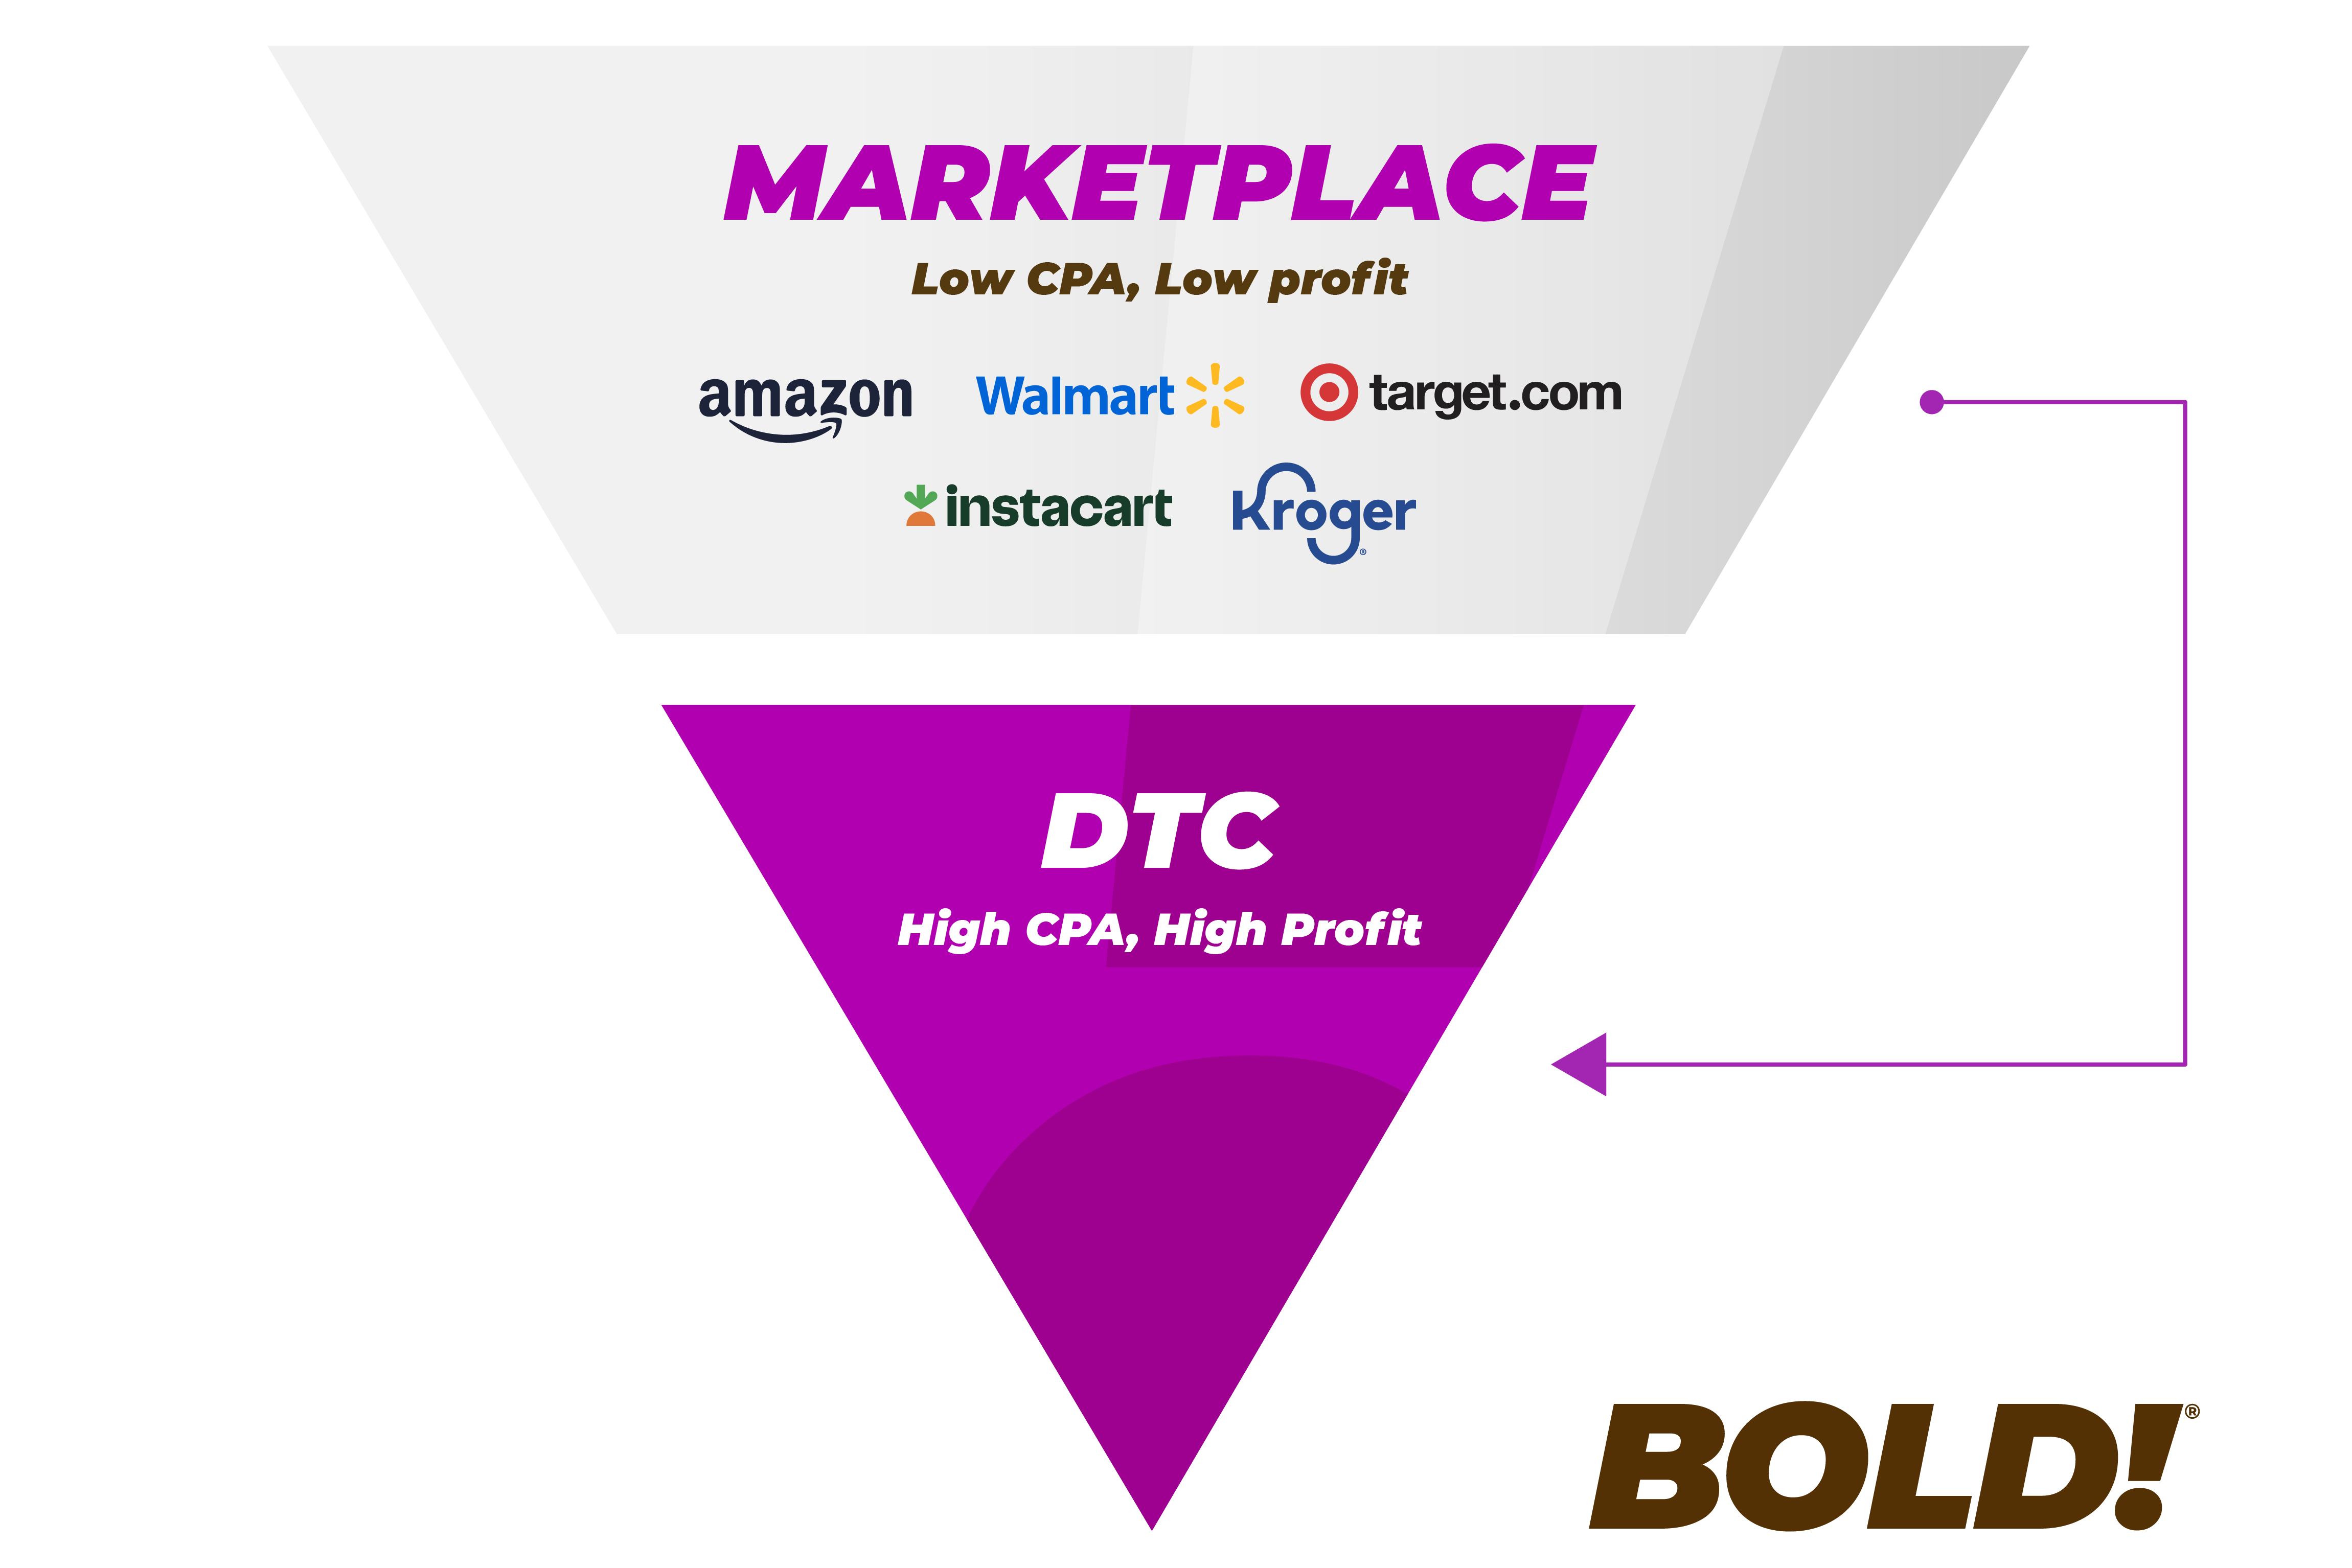 Bold Blog - Amazon and DTC Inverted Pyramid FINAL